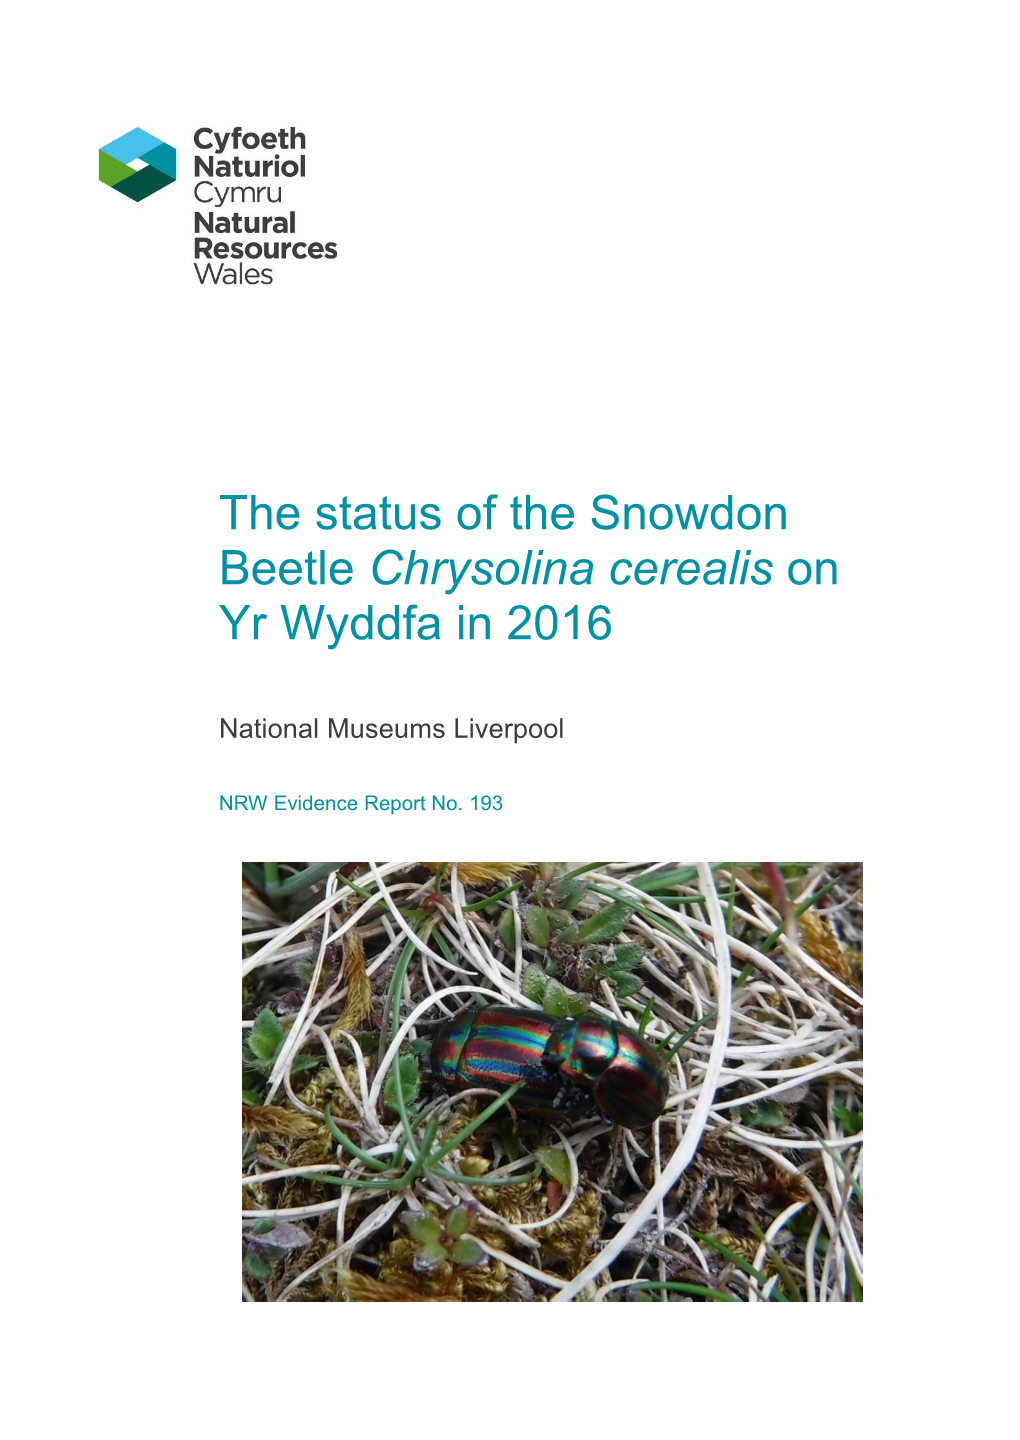 The Status of the Snowdon Beetle Chrysolina Cerealis on Yr Wyddfa in 2016